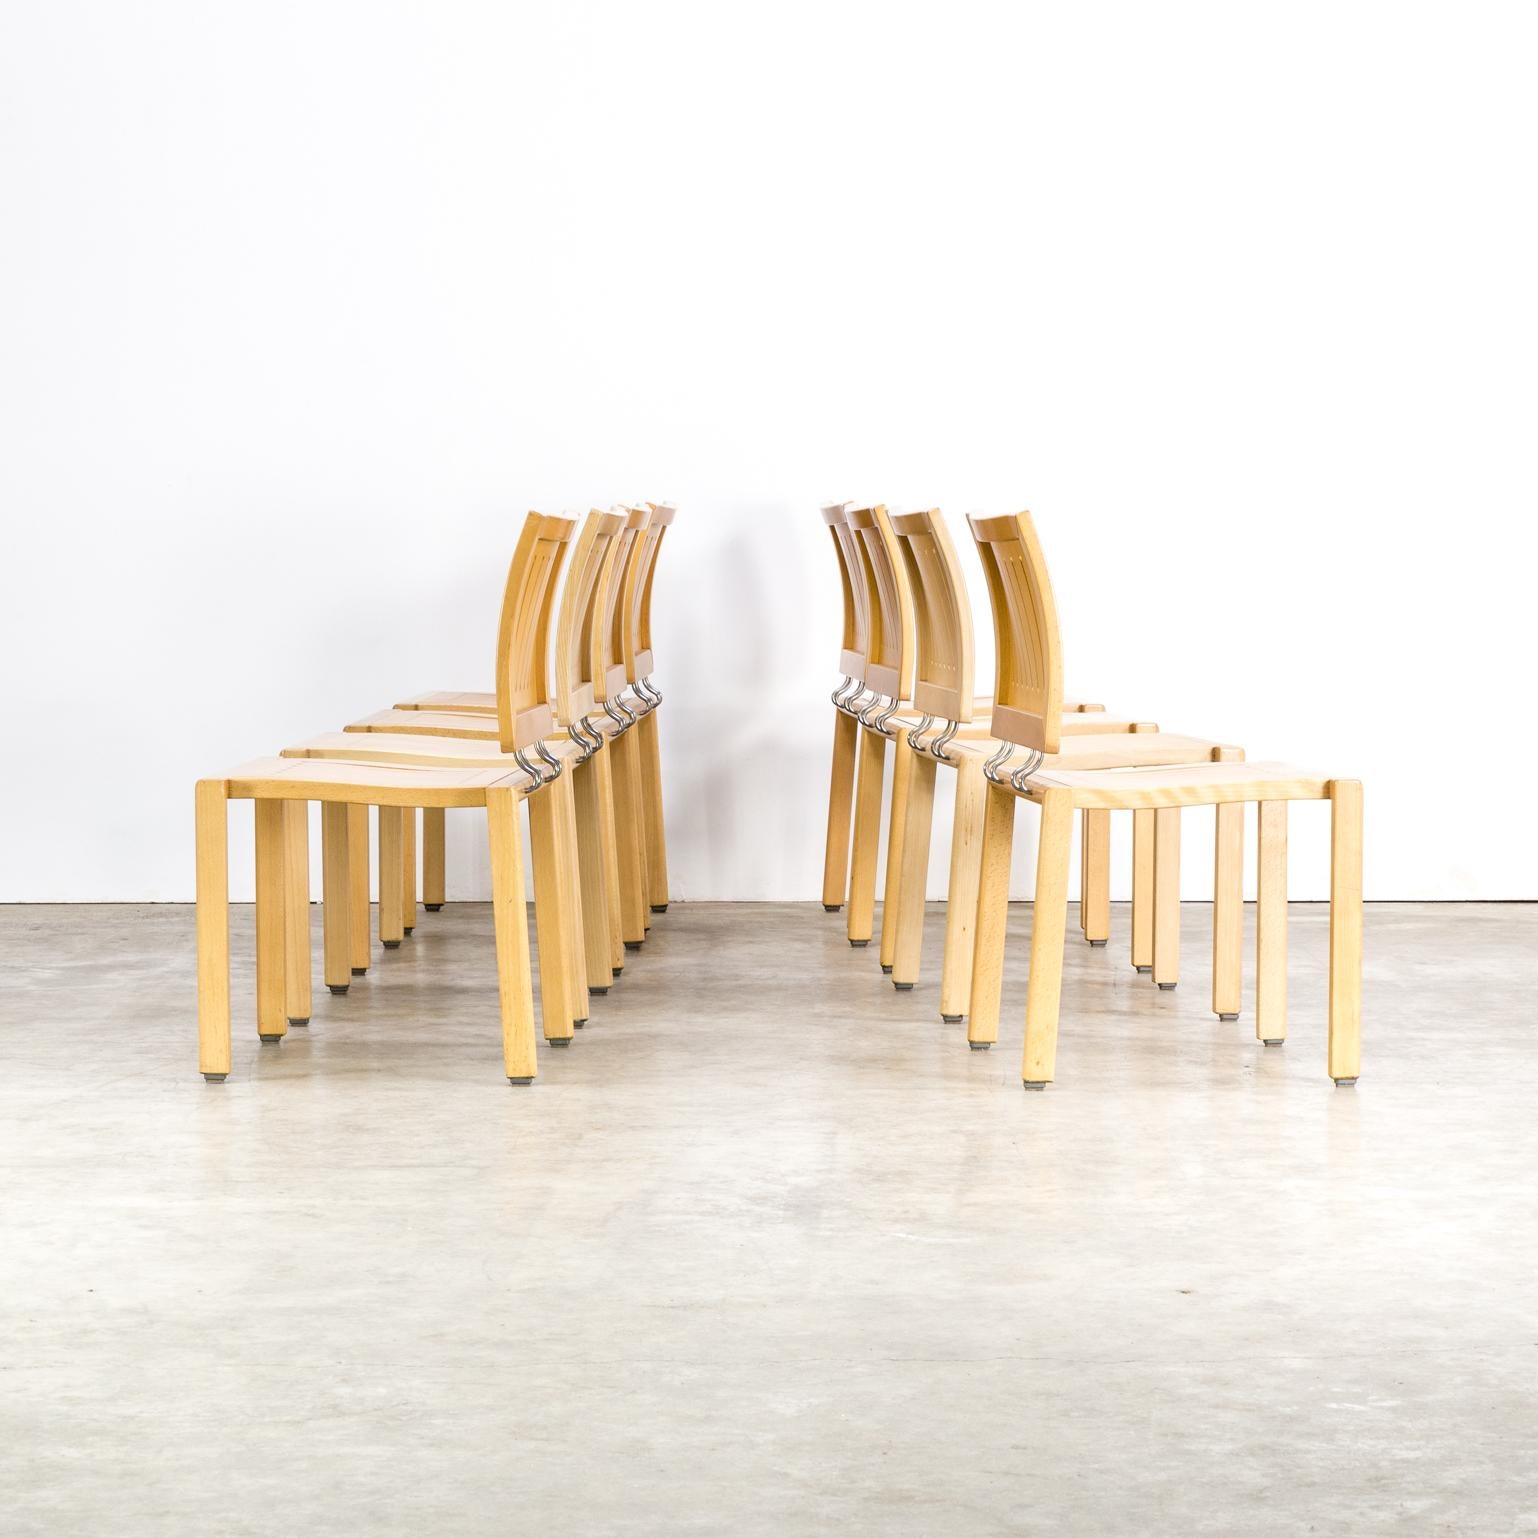 Bruno Rey & Charles Polin “Quadro W” Dining Chair for Dietiker, Set of 8 In Good Condition For Sale In Amstelveen, Noord